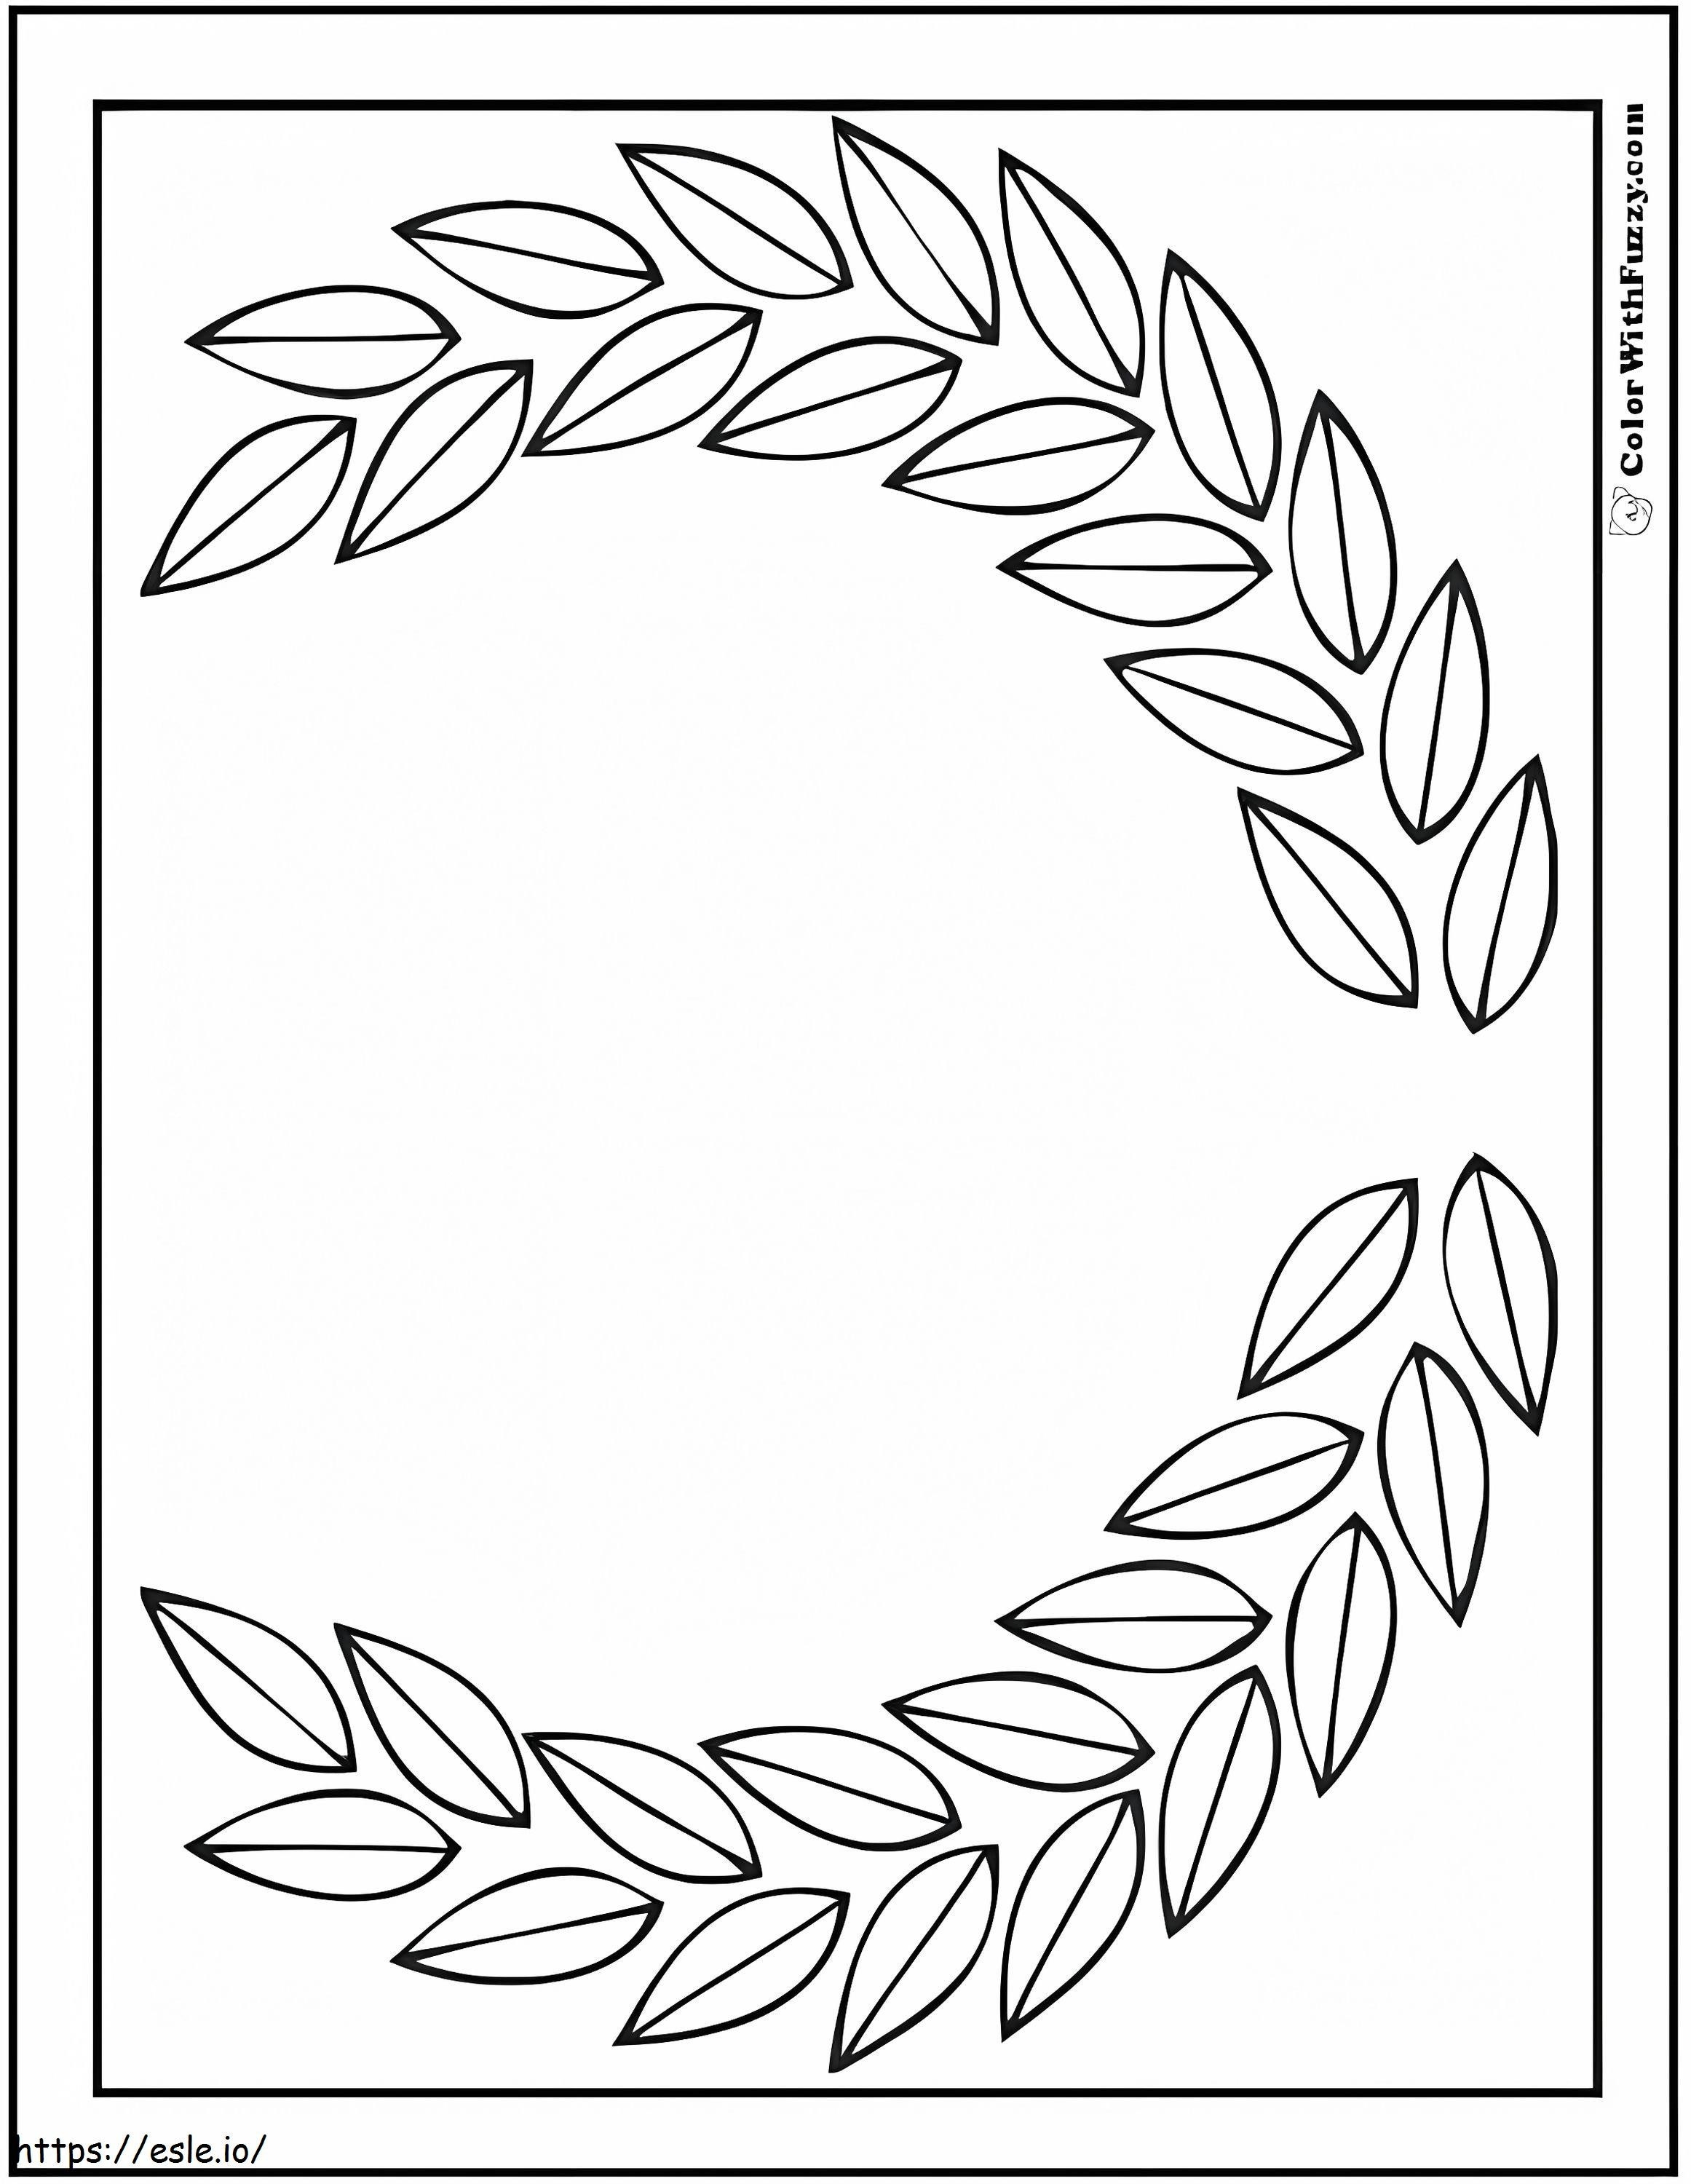 Geometric Leaf coloring page